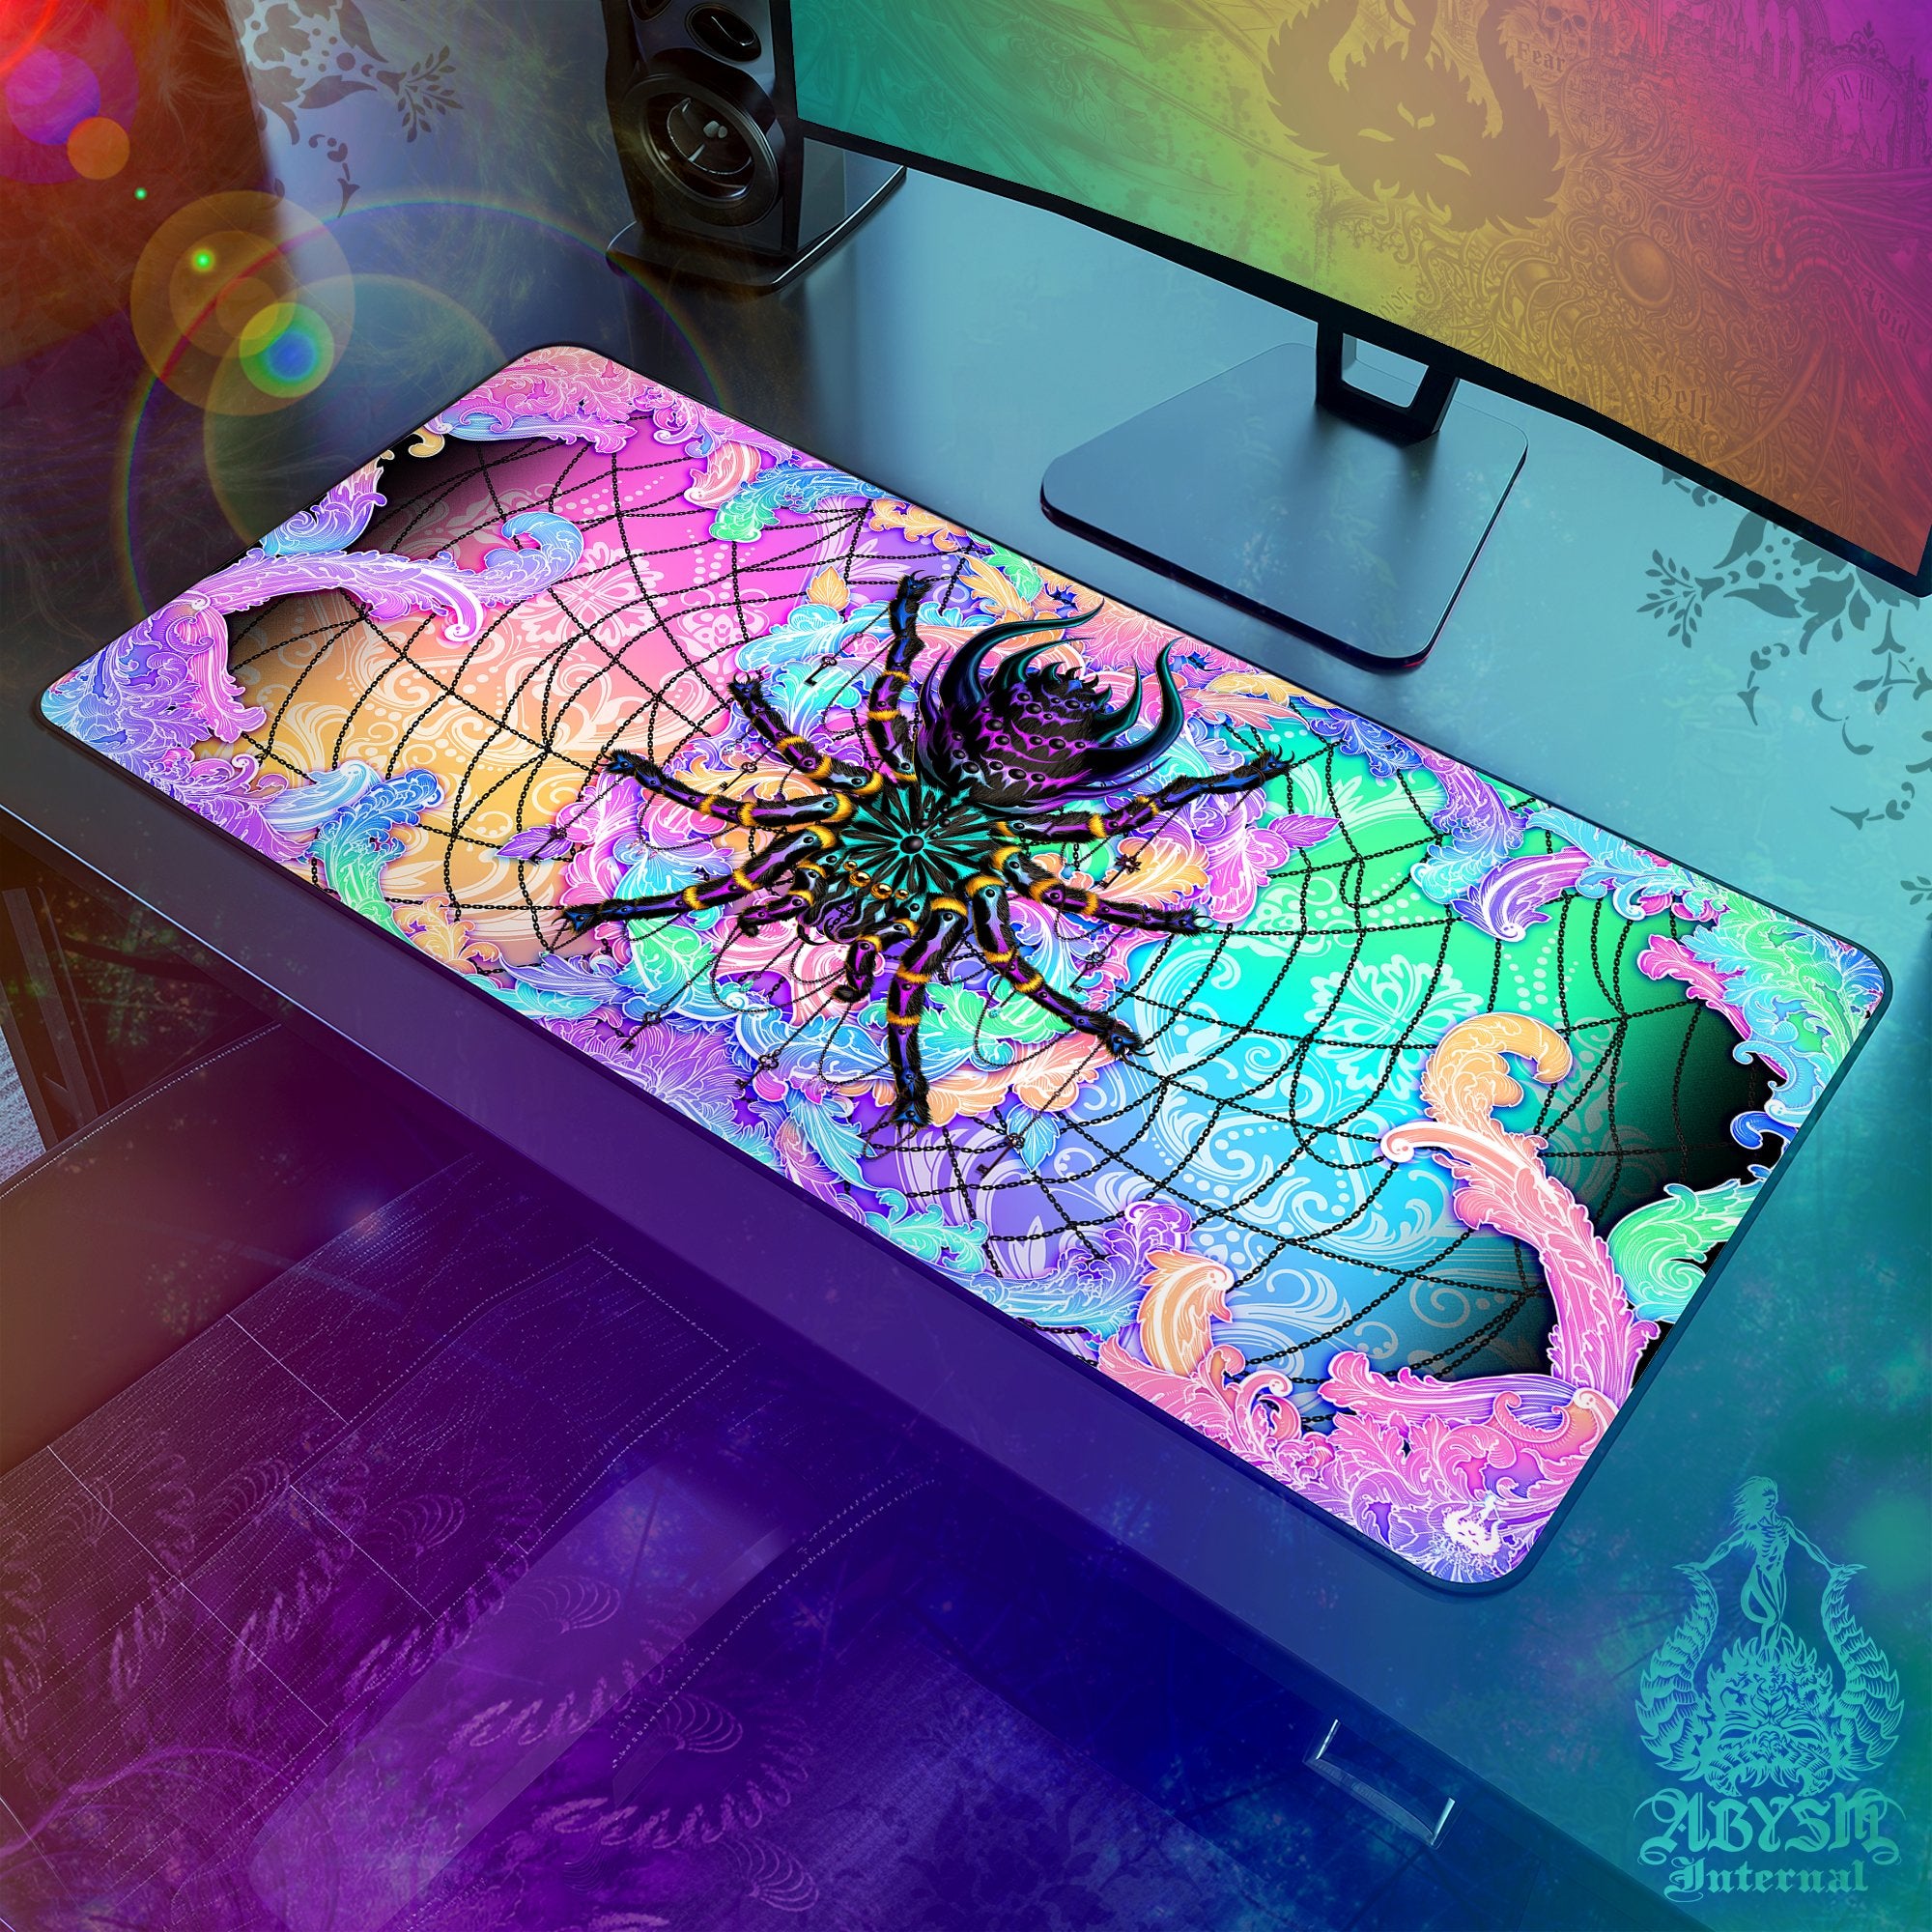 Psychedelic Gaming Desk Mat, Pastel Mouse Pad, Girl Gamer Table Protector Cover, Trippy Tarantula Workpad, Black Spider Art Print - Abysm Internal